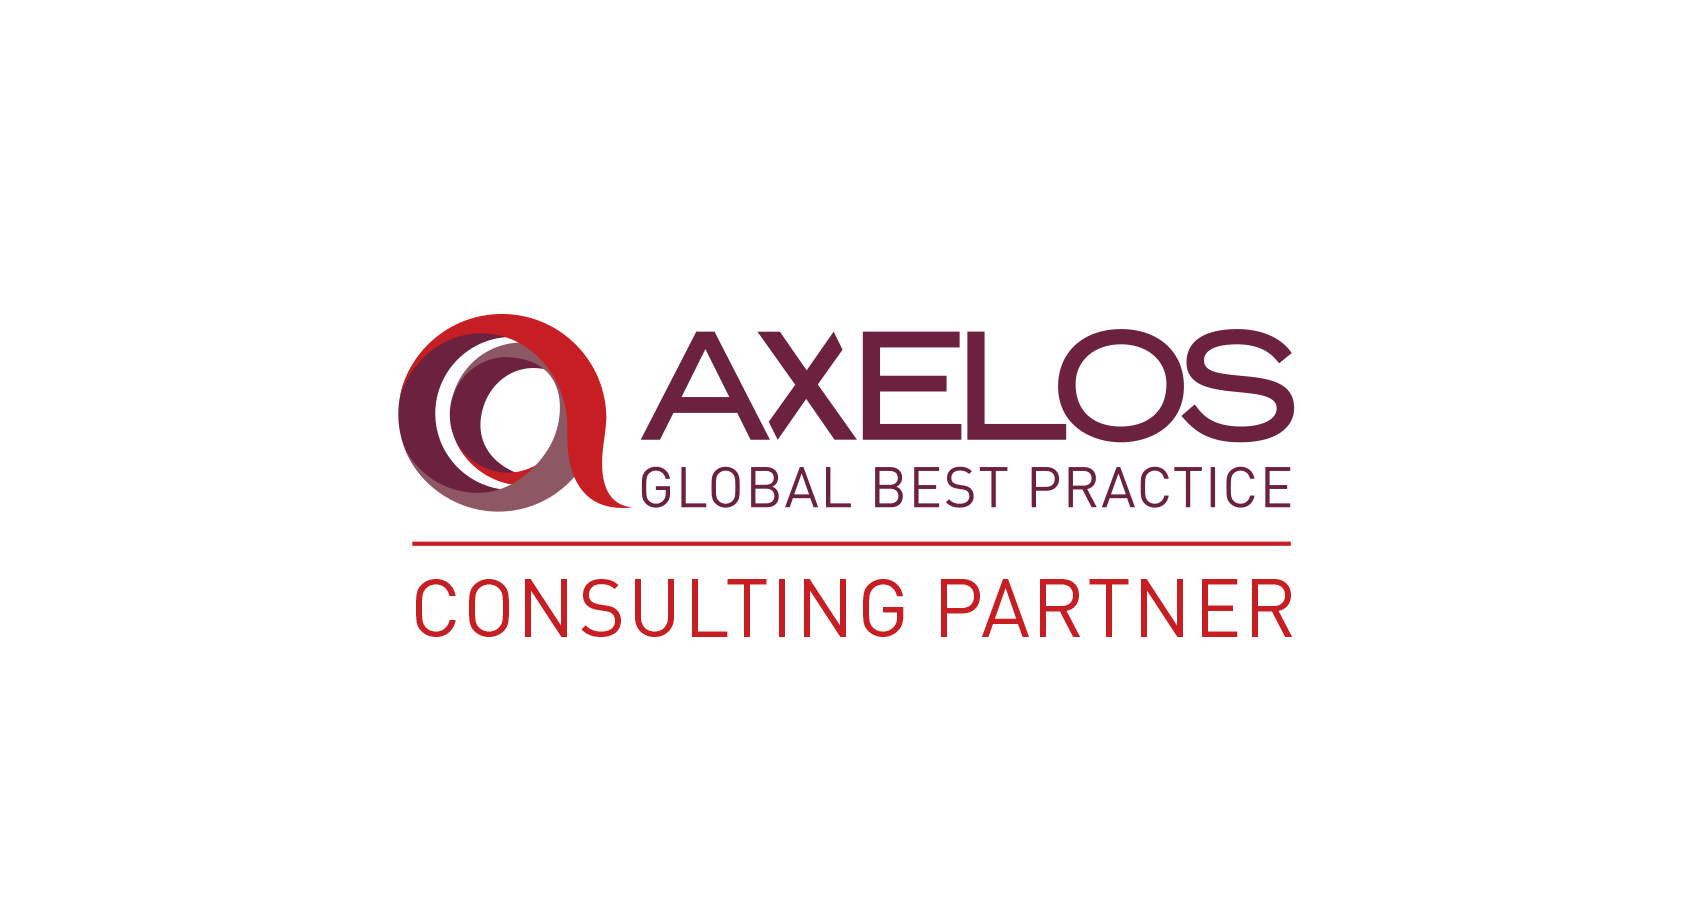 AXELOS Launches Updated Consulting Partner Programme